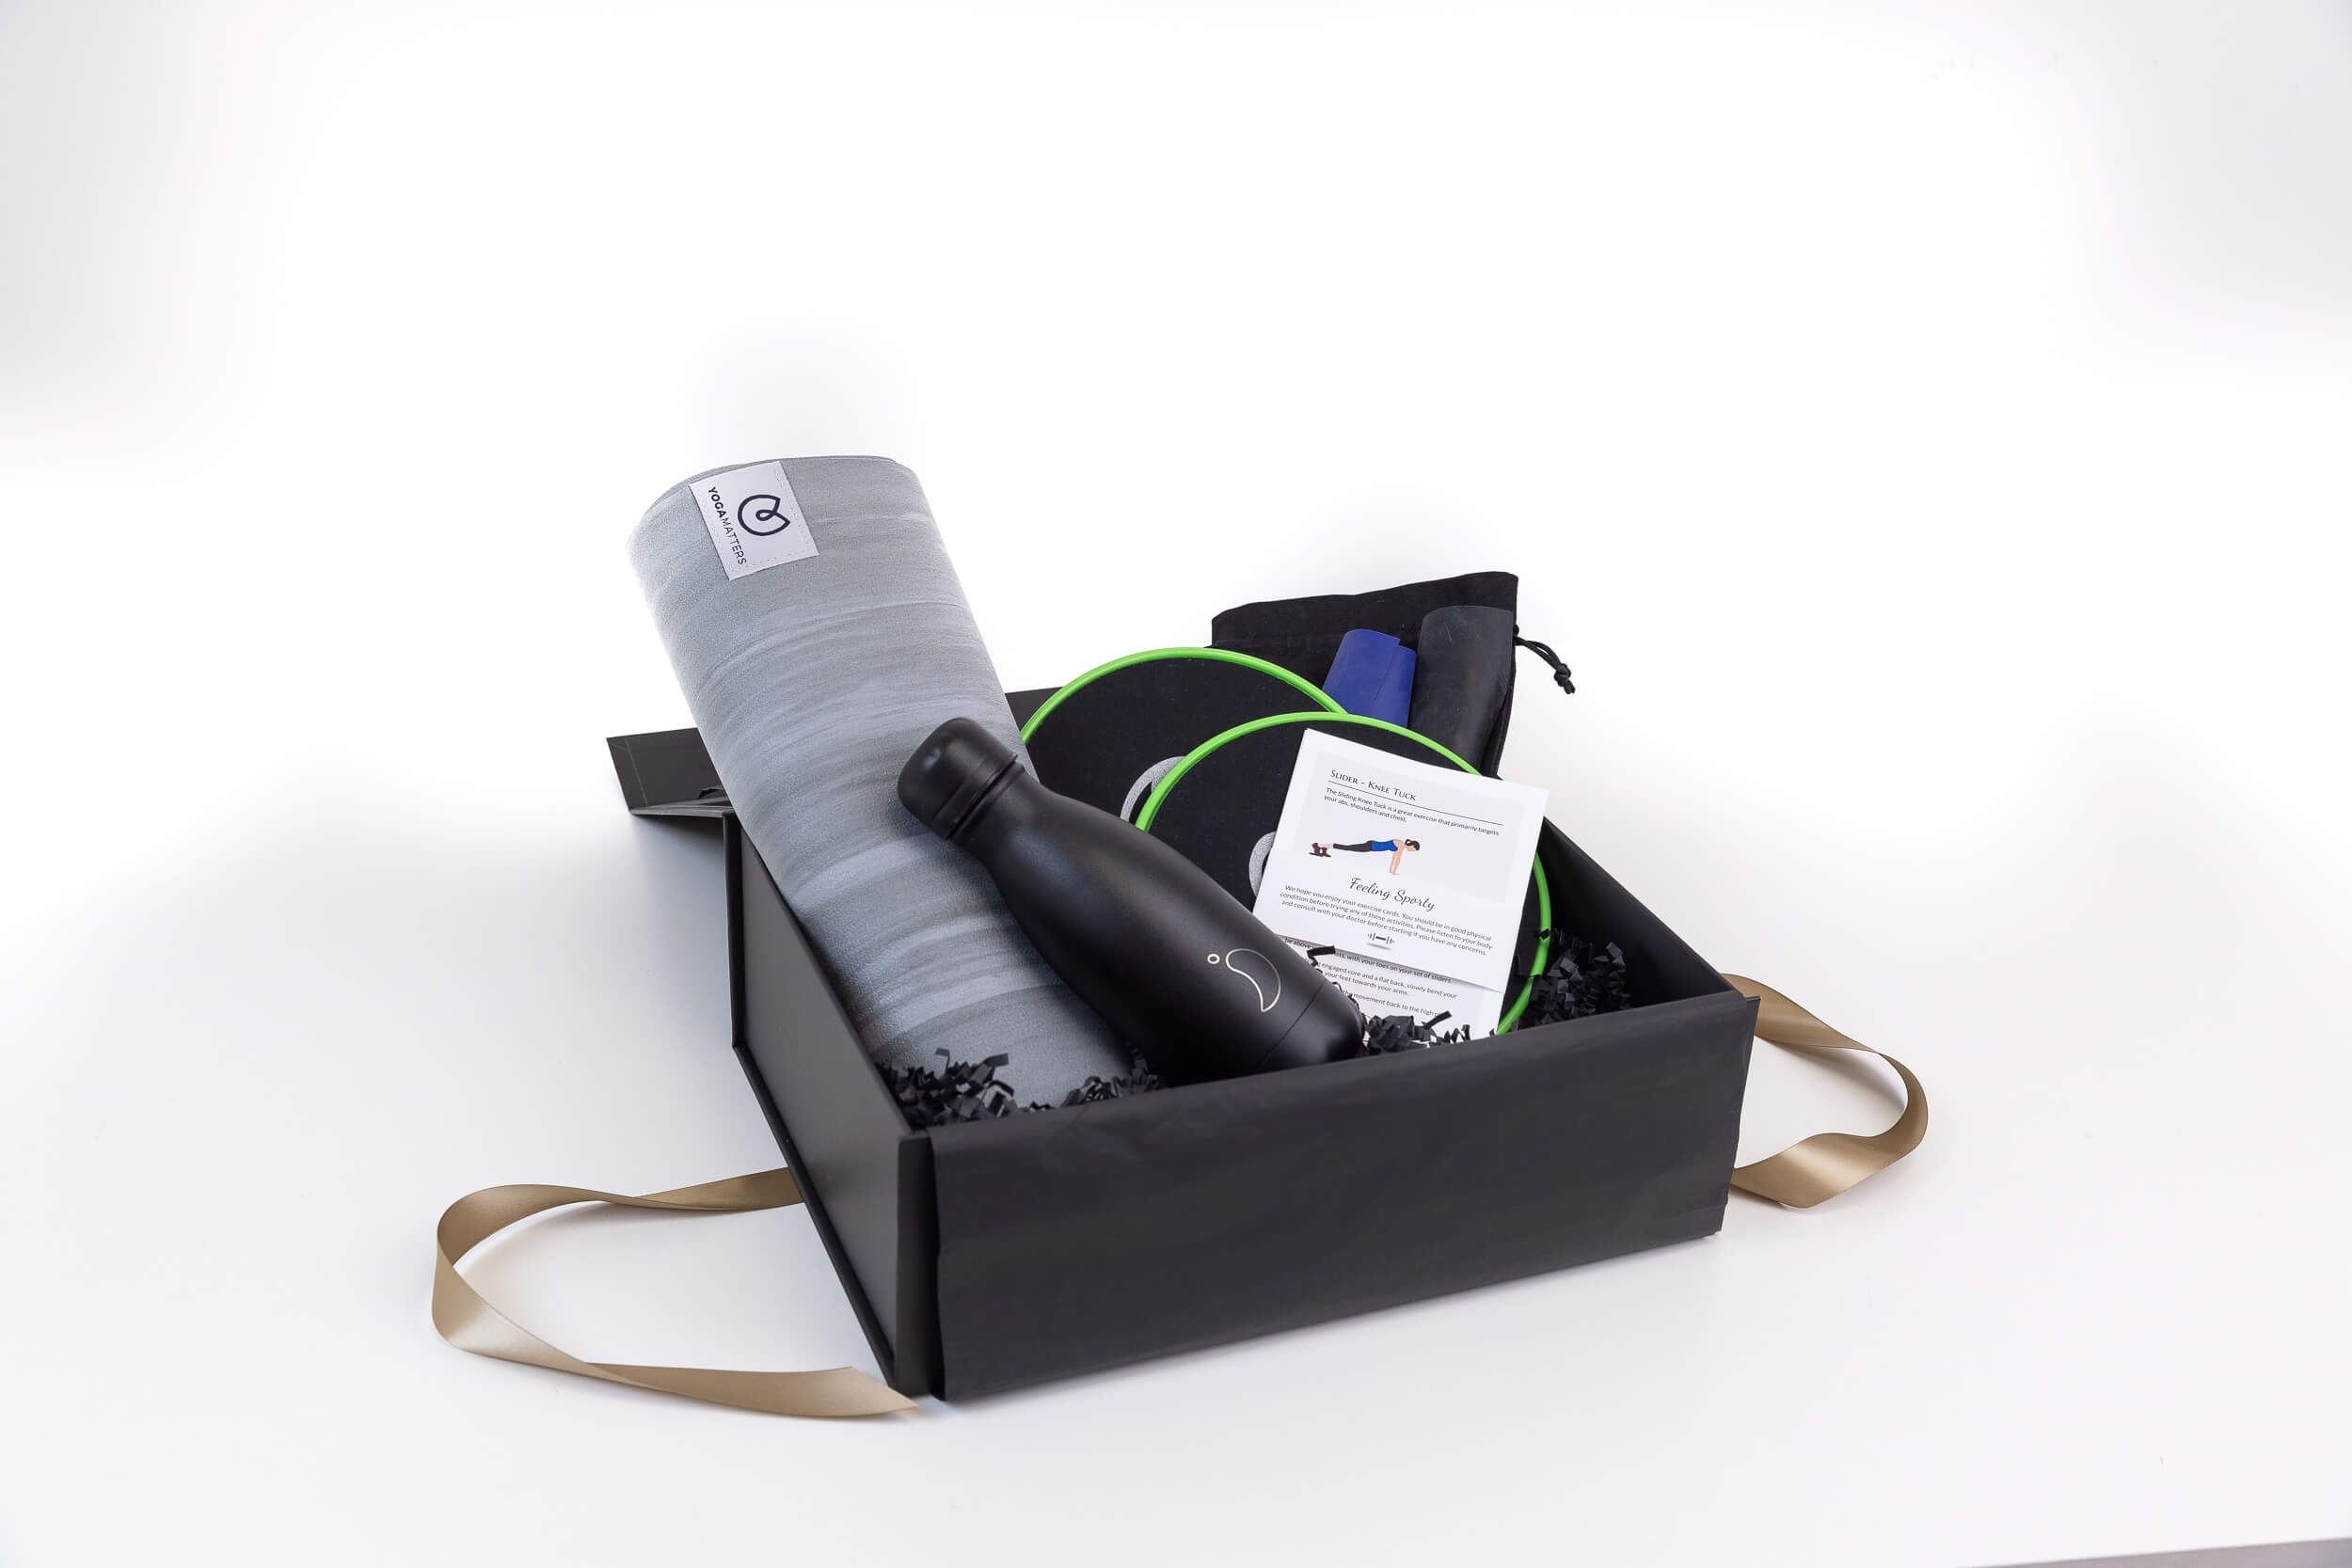 Feeling Sporty Christmas Employee Gifts with YogaMatters sticky yoga mat, exercise sliders and Chilly's water bottle